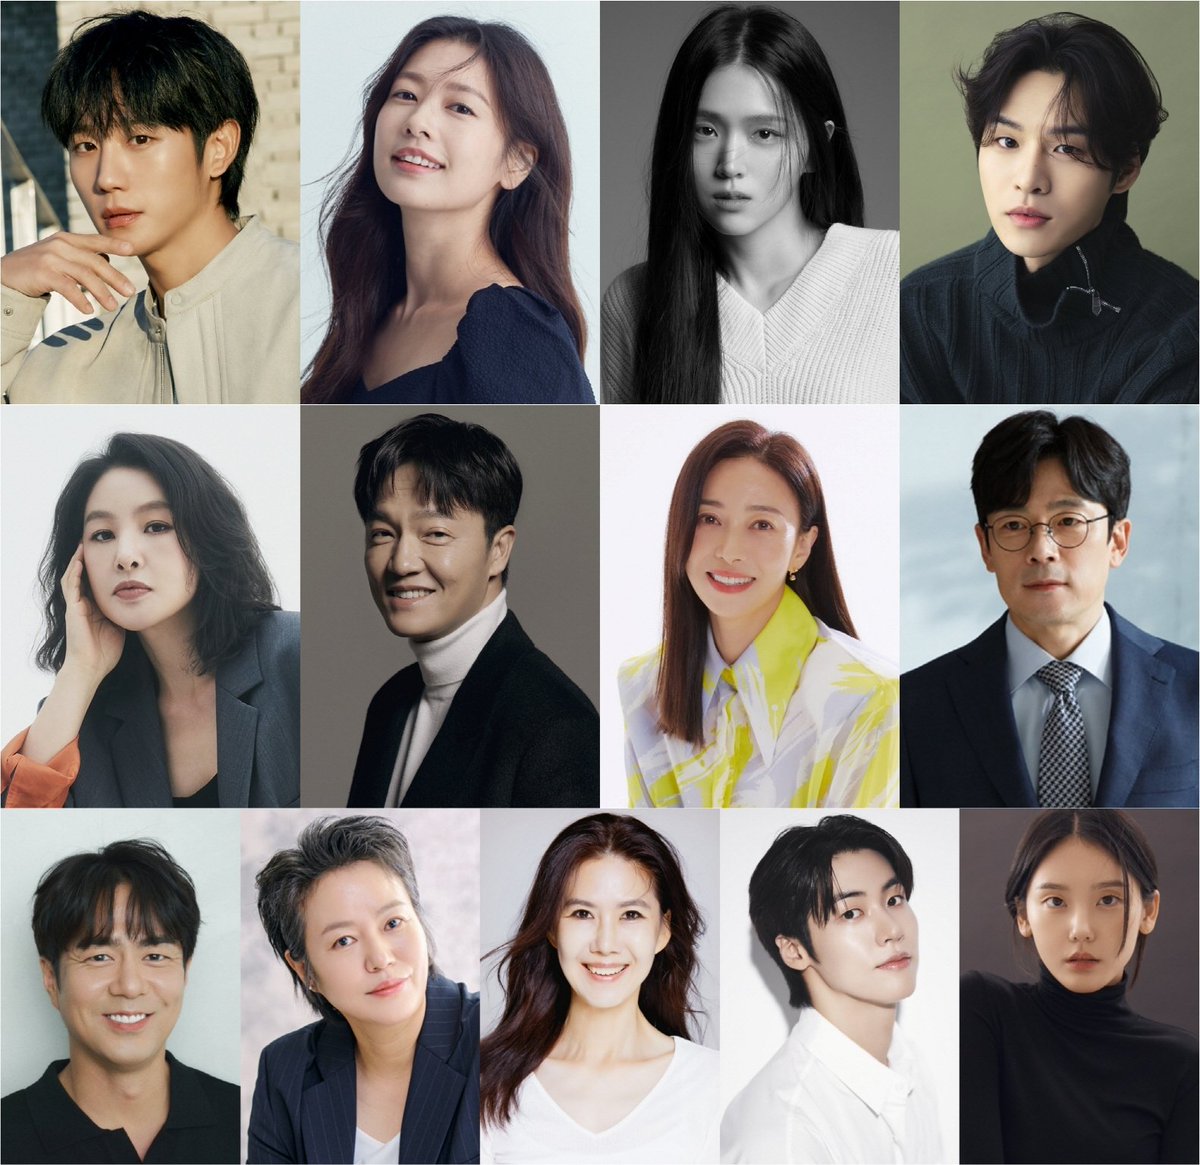 #MomsFriendSon 
A romantic comedy about a woman trying to reboot her error-filled life and the 'Mom's Friend's Son,' who is her living history. 

Starring #JungHaeIn #JungSoMin #KimJiEun #YunJiOn #ParkJiYoung #JoHanChul #JangYoungNam #LeeSeungJoon #JunSukHo #KimGeumSoon #HanYeJu